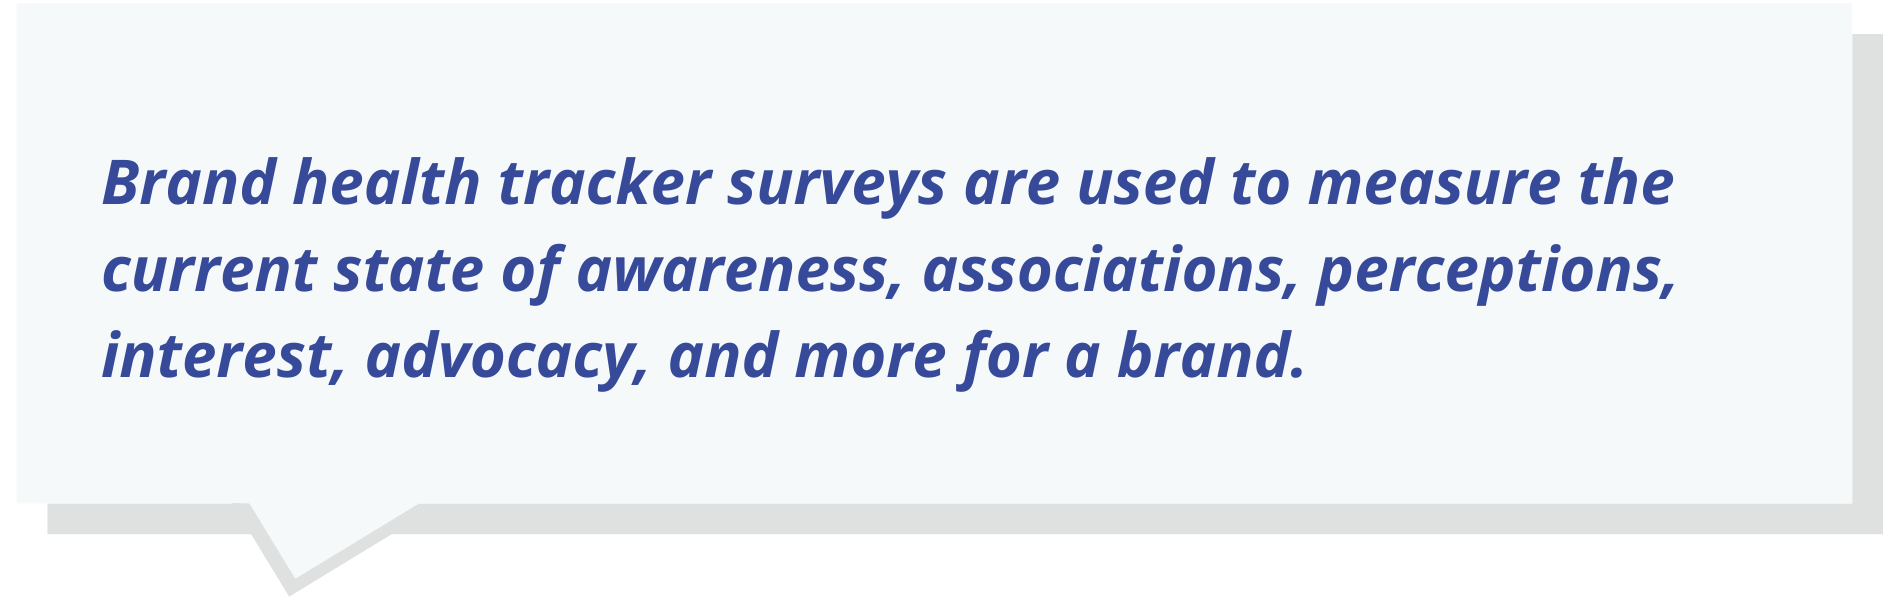 Brand health tracker surveys are used to measure the current state of awareness, associations, perceptions, interest, advocacy, and more for a brand.